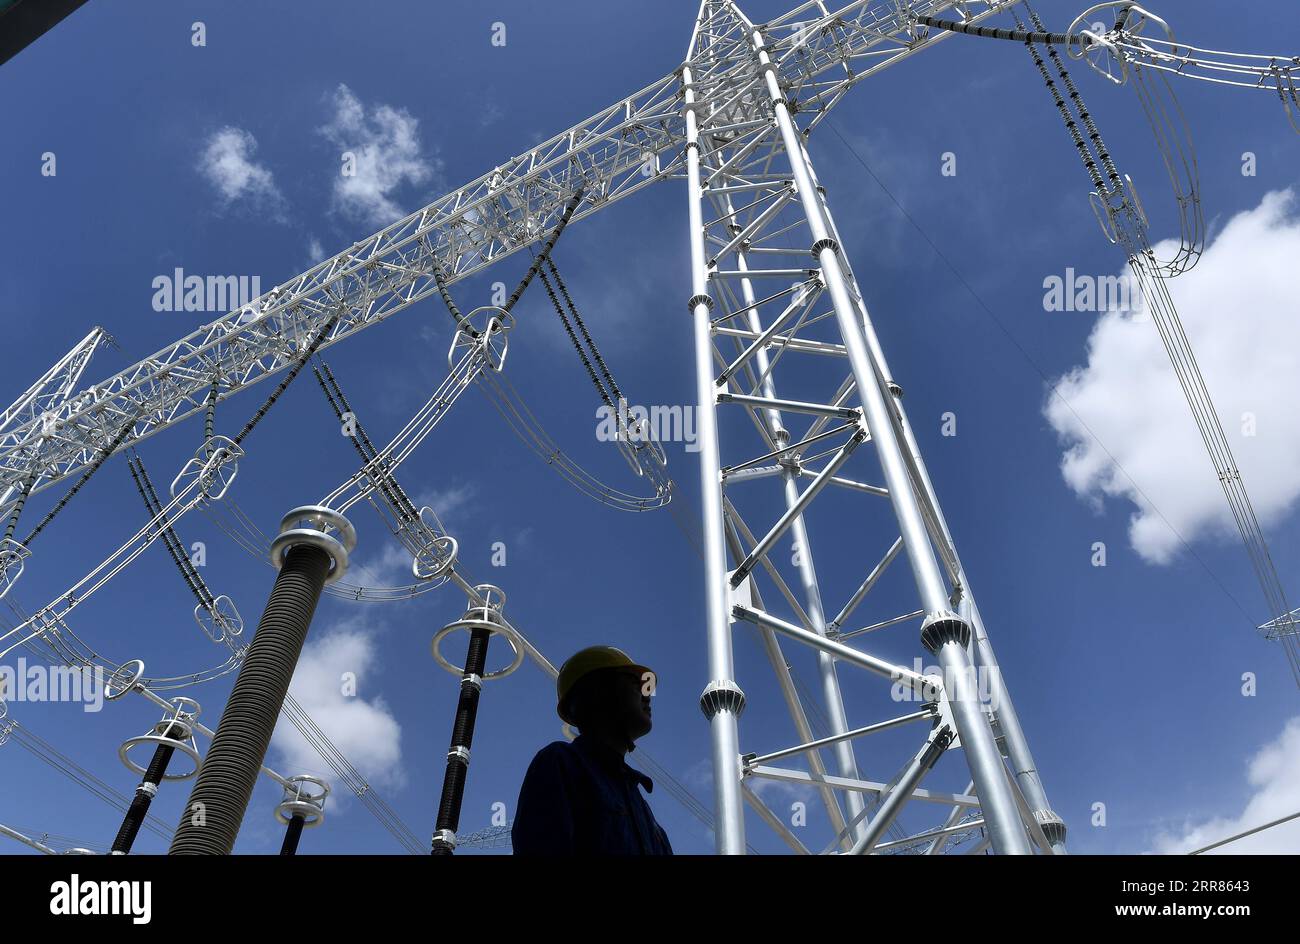 210420 -- XINING, April 20, 2021 -- A worker patrols at a converter station of ultra-high voltage transmission line from Qinghai to Henan, in northwest China s Qinghai Province, April 16, 2021. The clean power transmission volume of ultra-high voltage link between Qinghai and Henan has hit 10 billion kilowatt-hours kWh, according to State Grid Corporation of China SGCC. The 800-kilovolt direct current transmission line, stretching 1563 kilometers via four provinces, from northwest China s Qinghai, Gansu and Shaanxi provinces to central China s Henan Province, started its operation on December Stock Photo